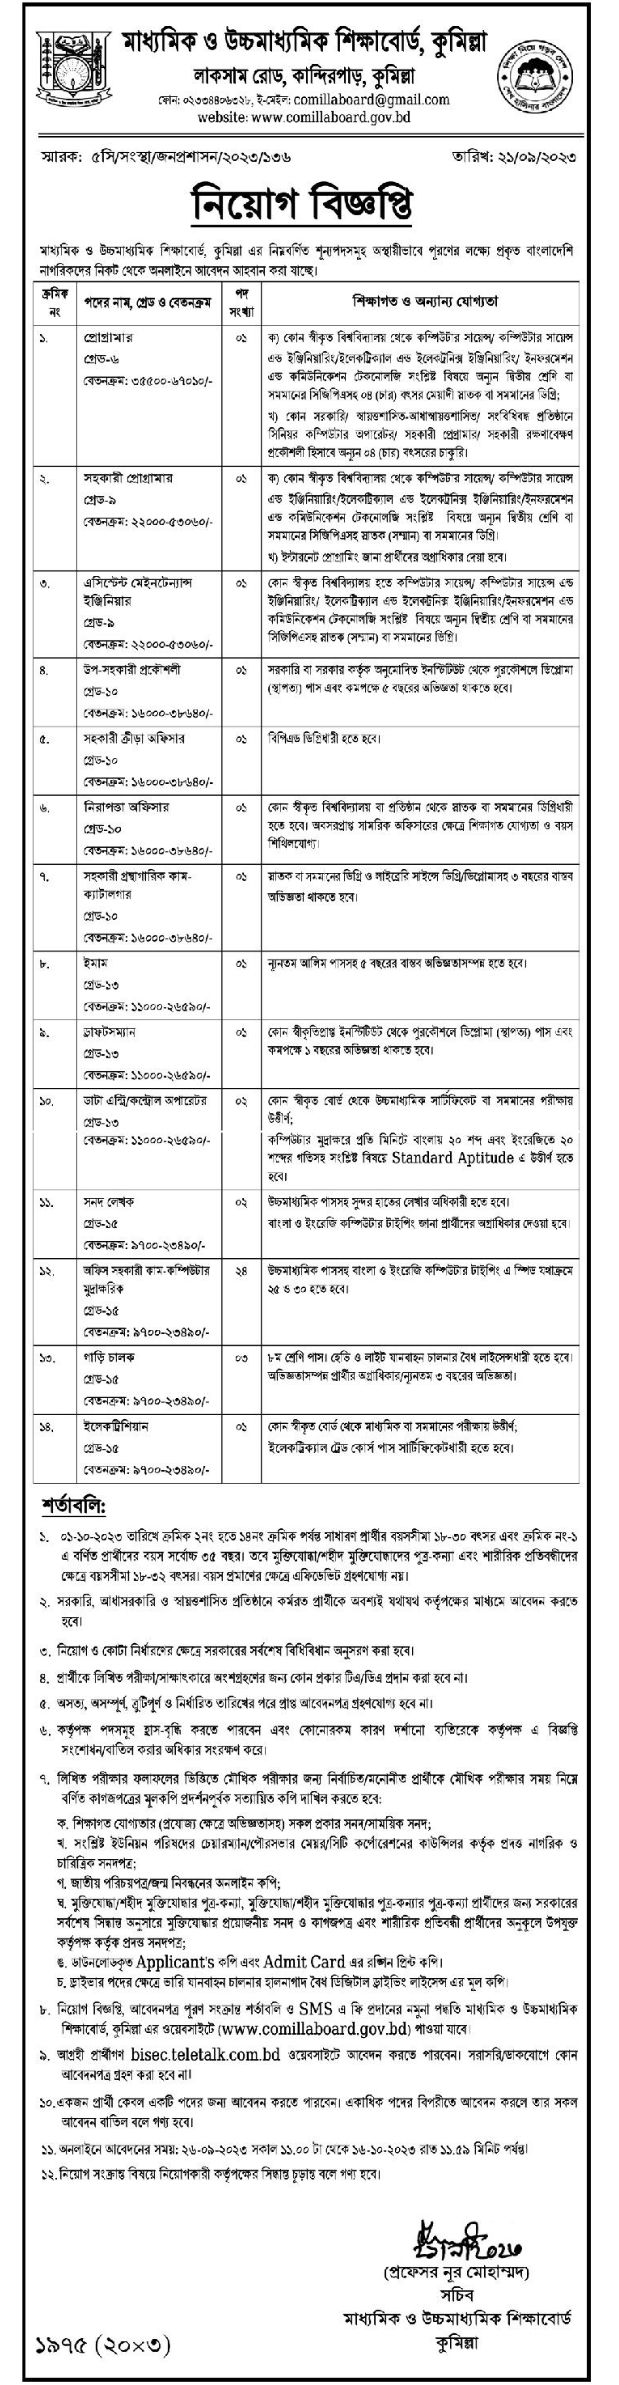 Secondary and Higher Secondary Education Board Job Circular